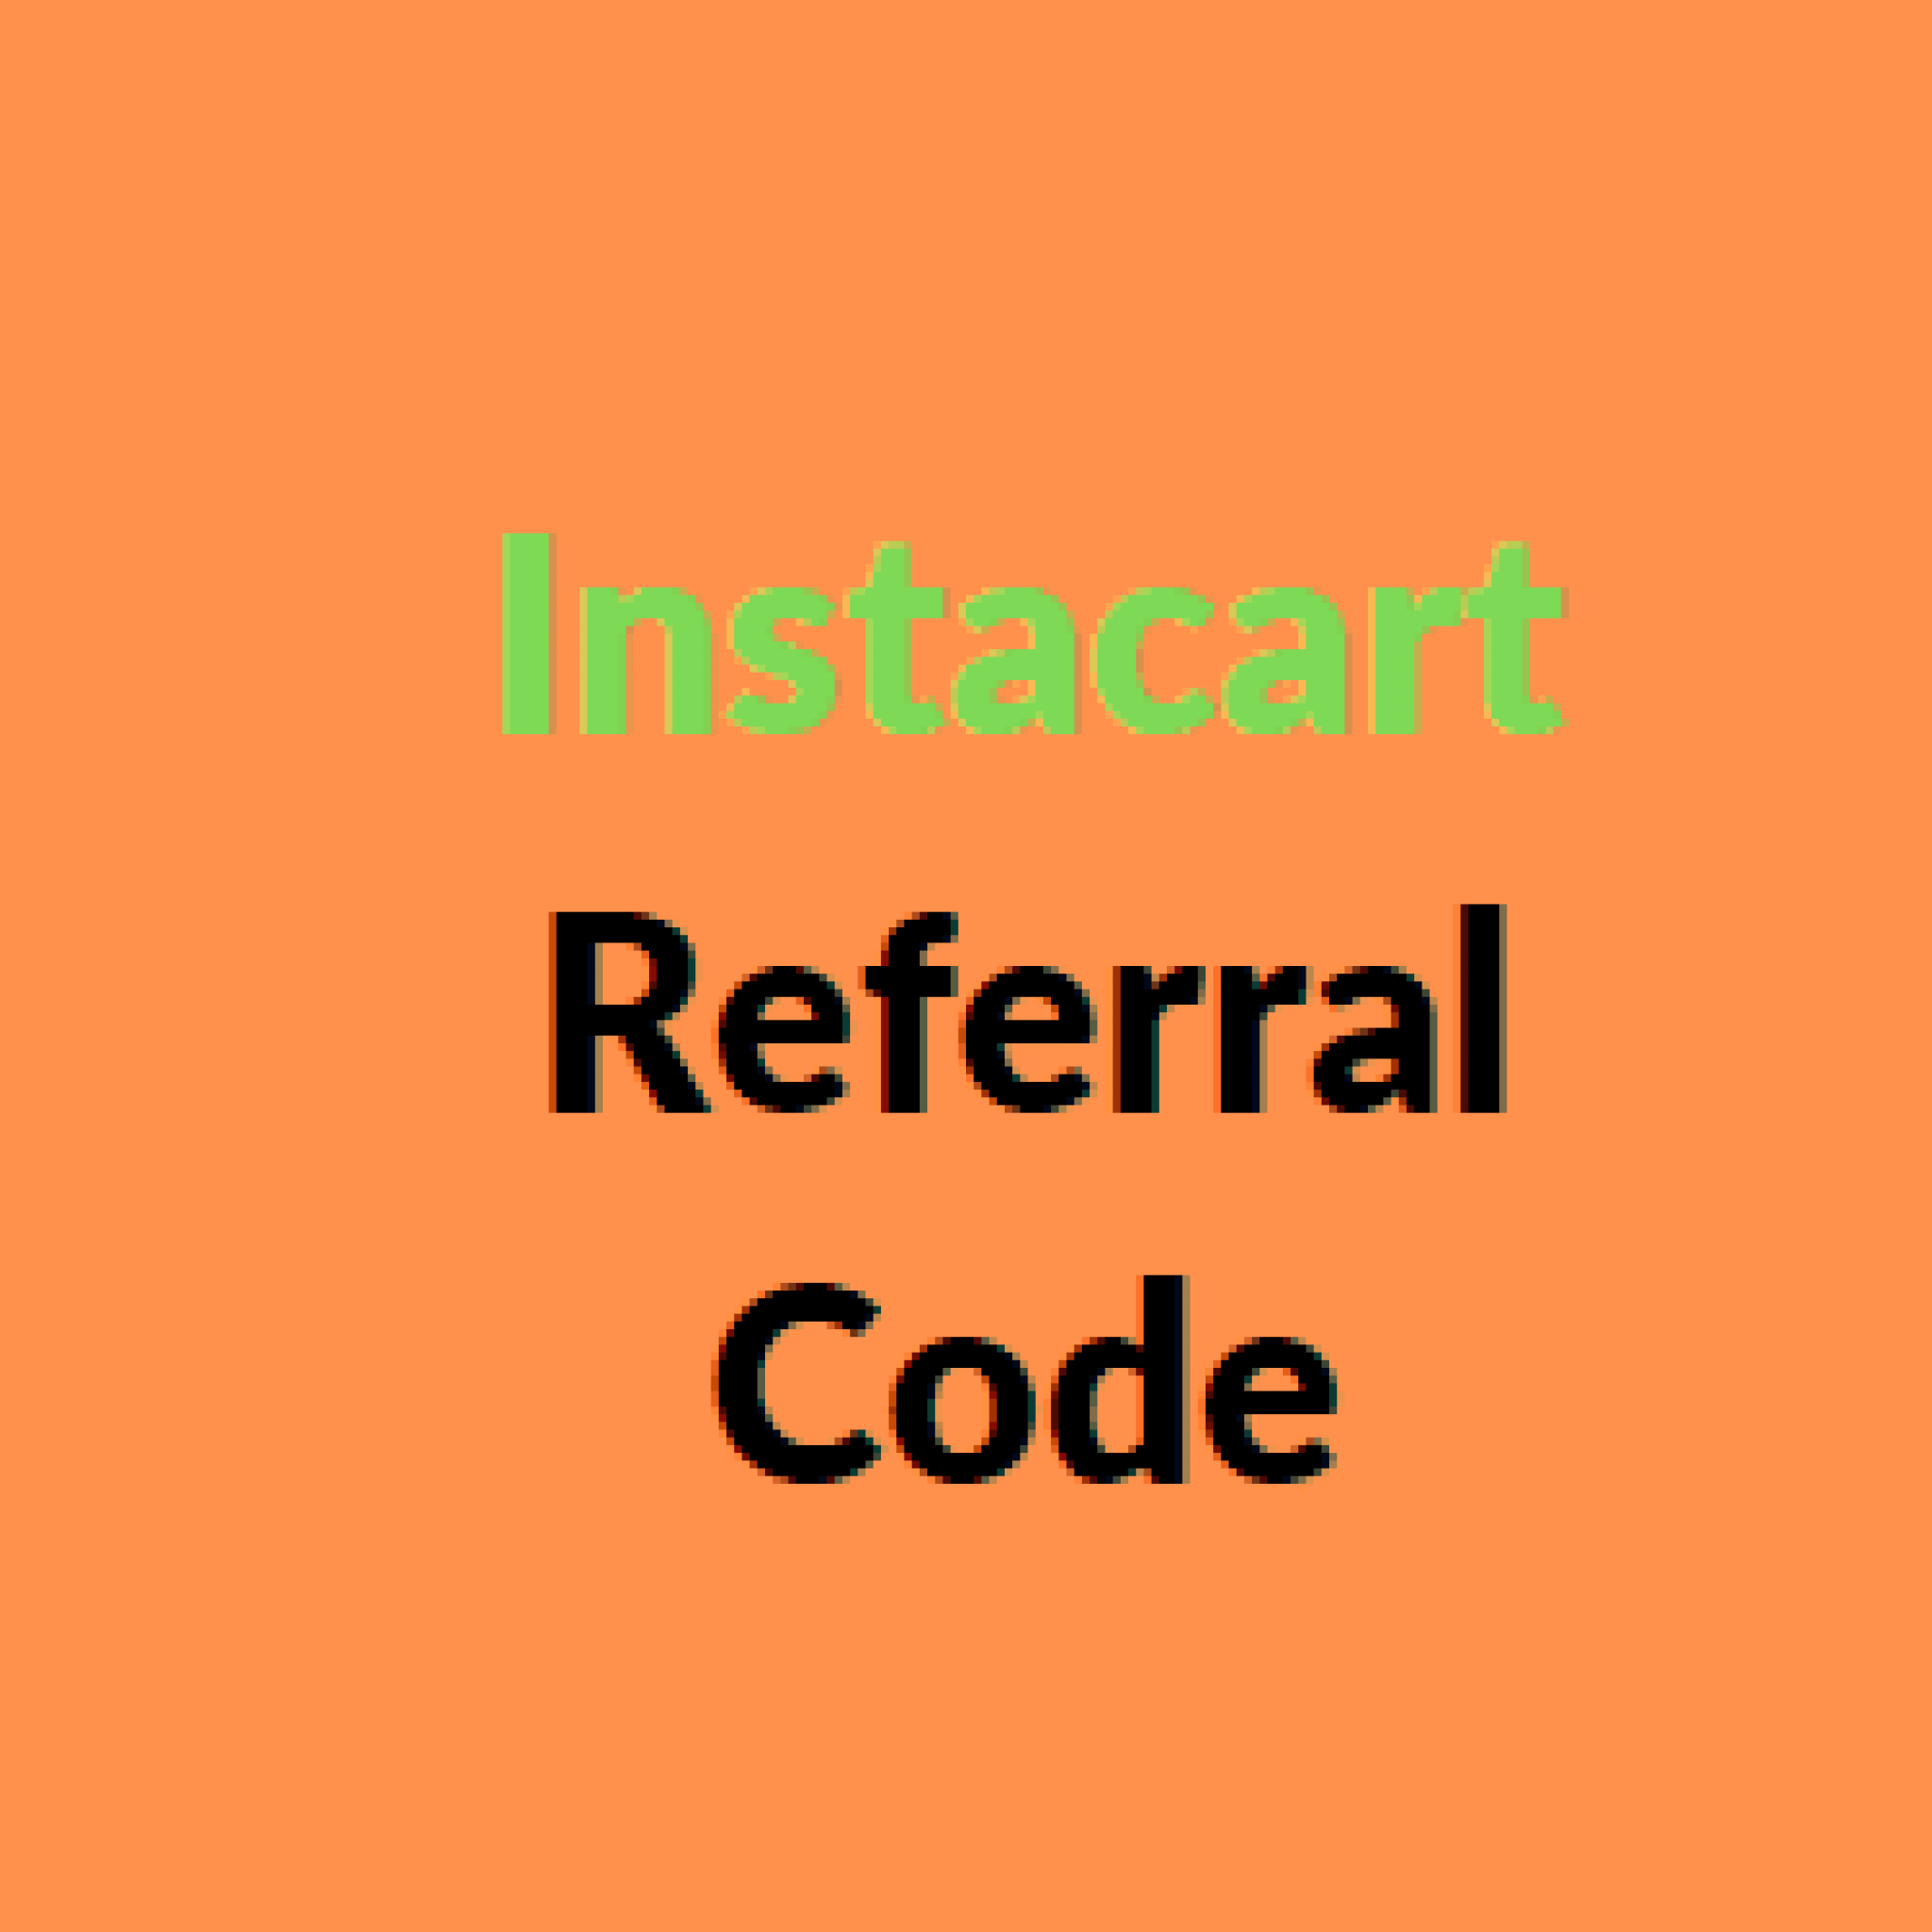 Instacart Referral Code [2022] Get 10 on Every Referrals